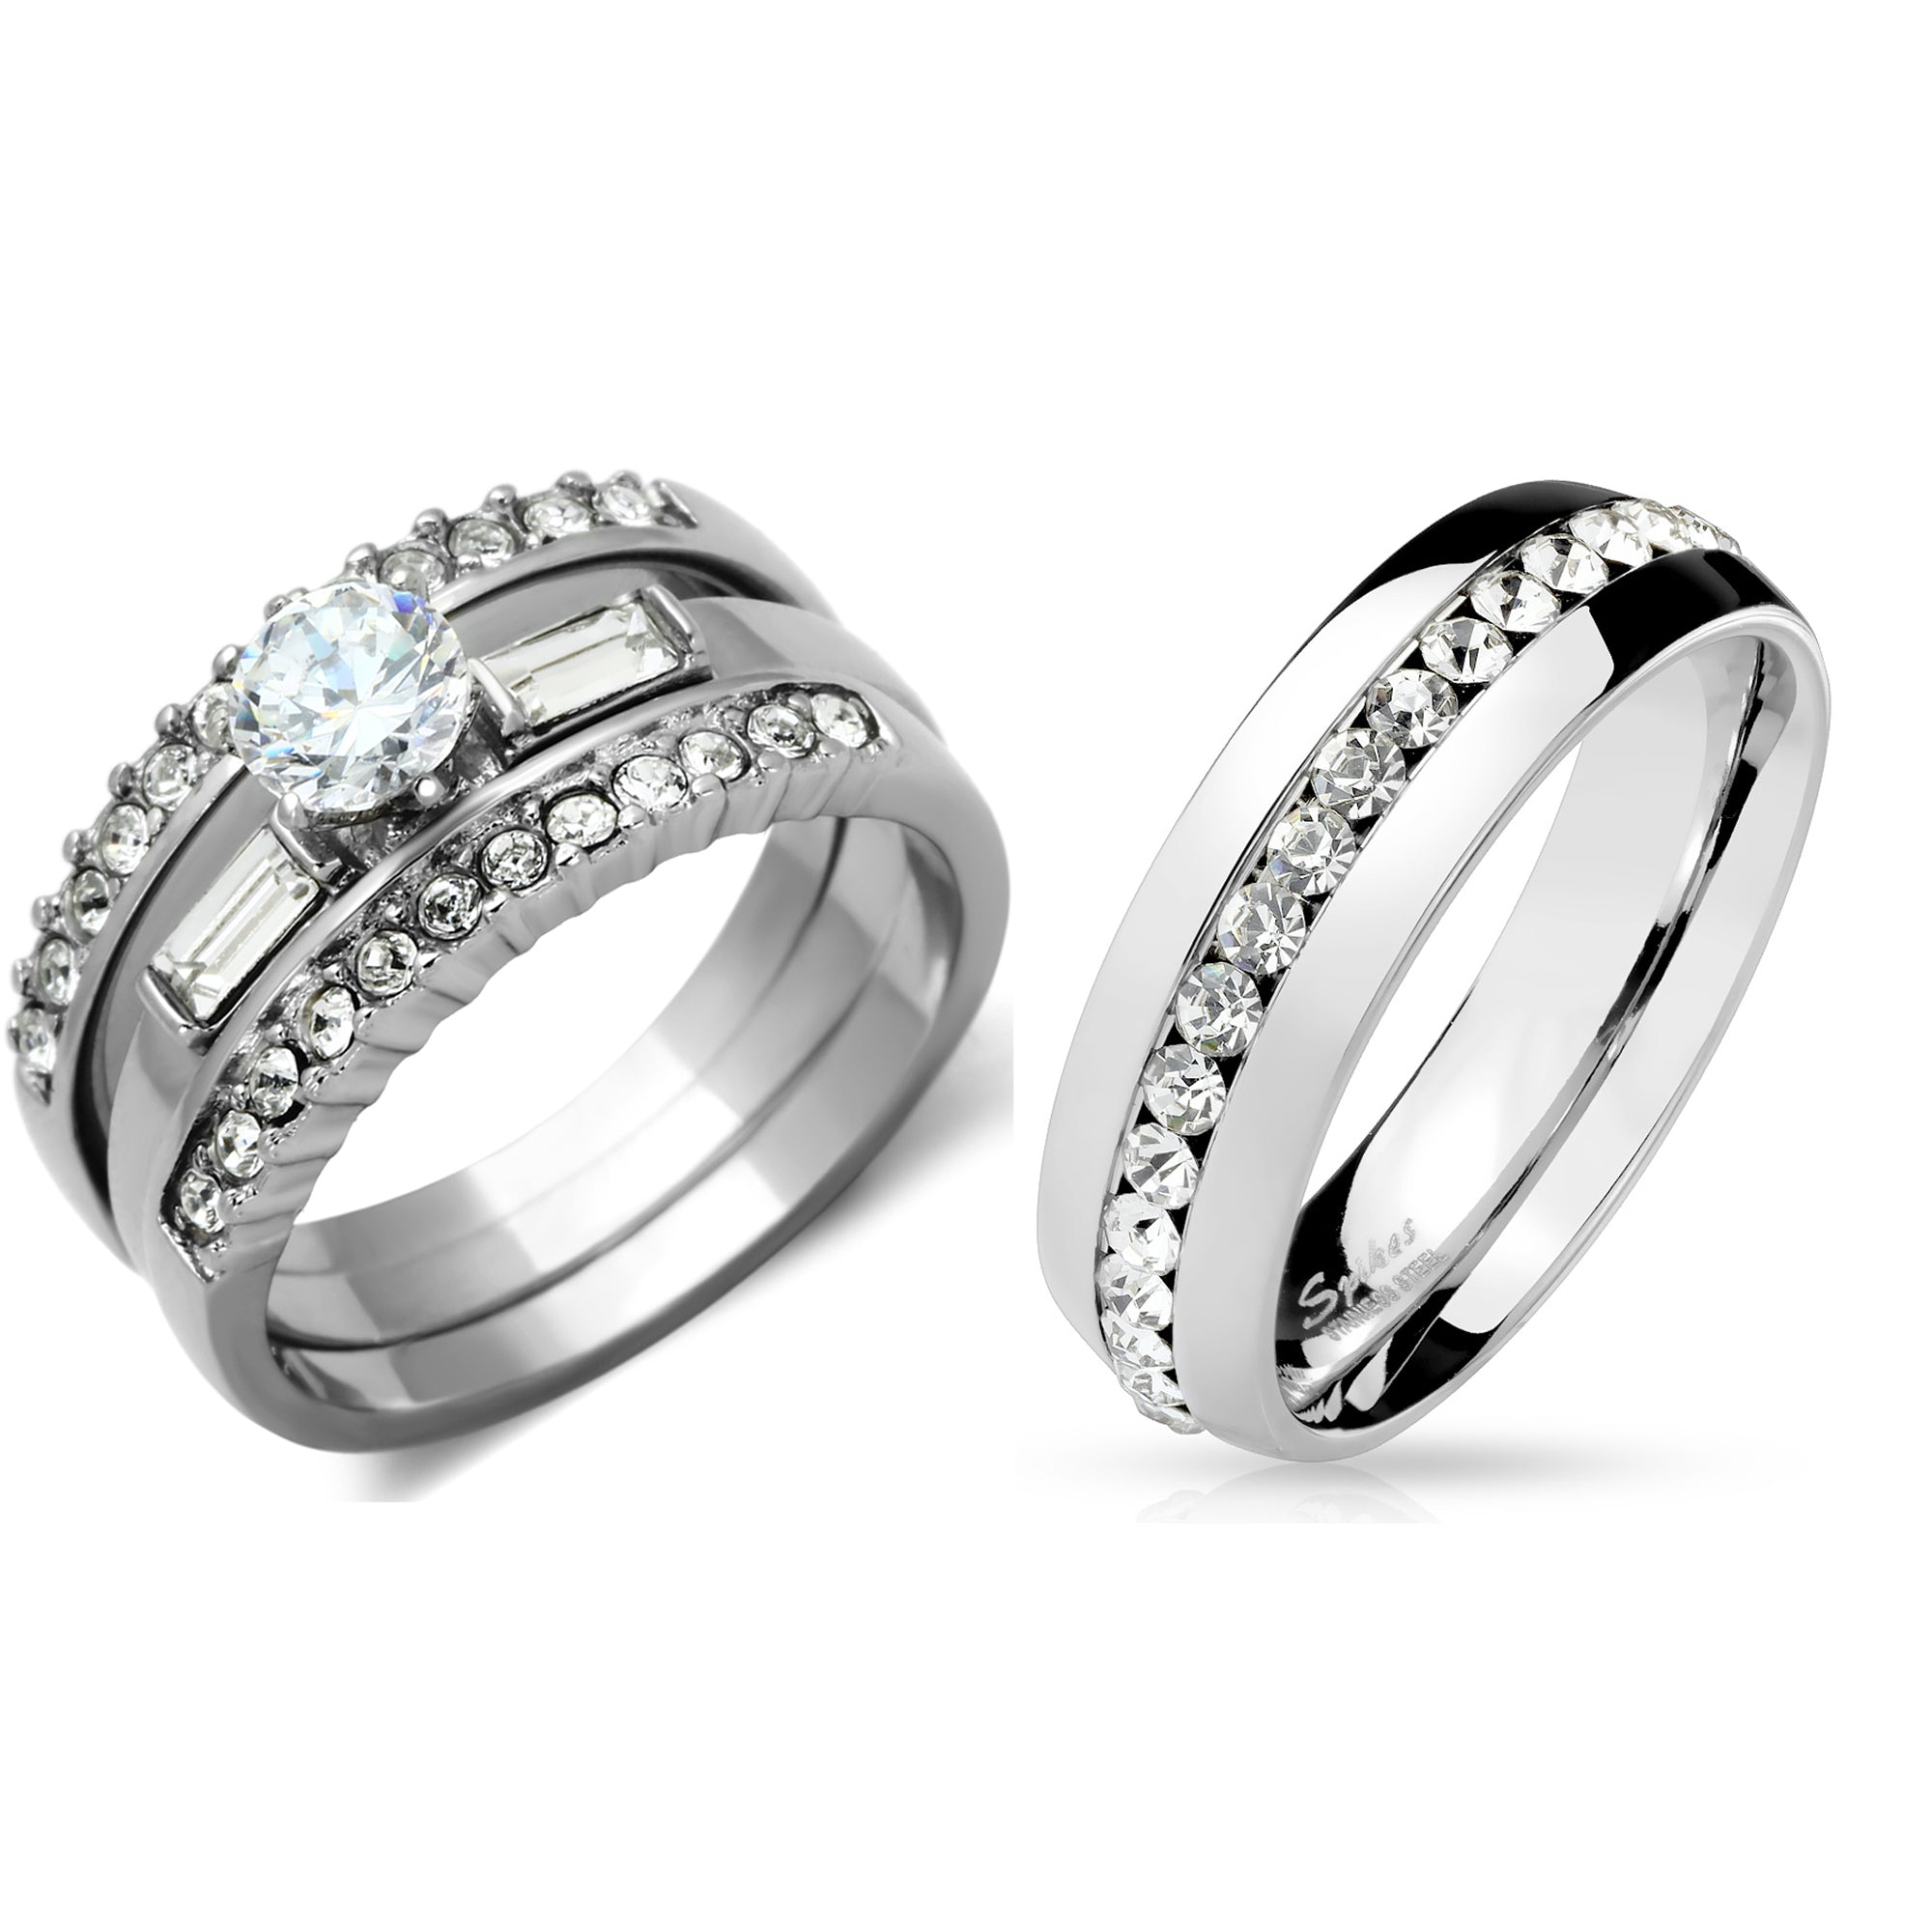 His Hers 4 PCS Womens Stainless Steel Wedding Set w/ Mens All Around Clear CZ Band